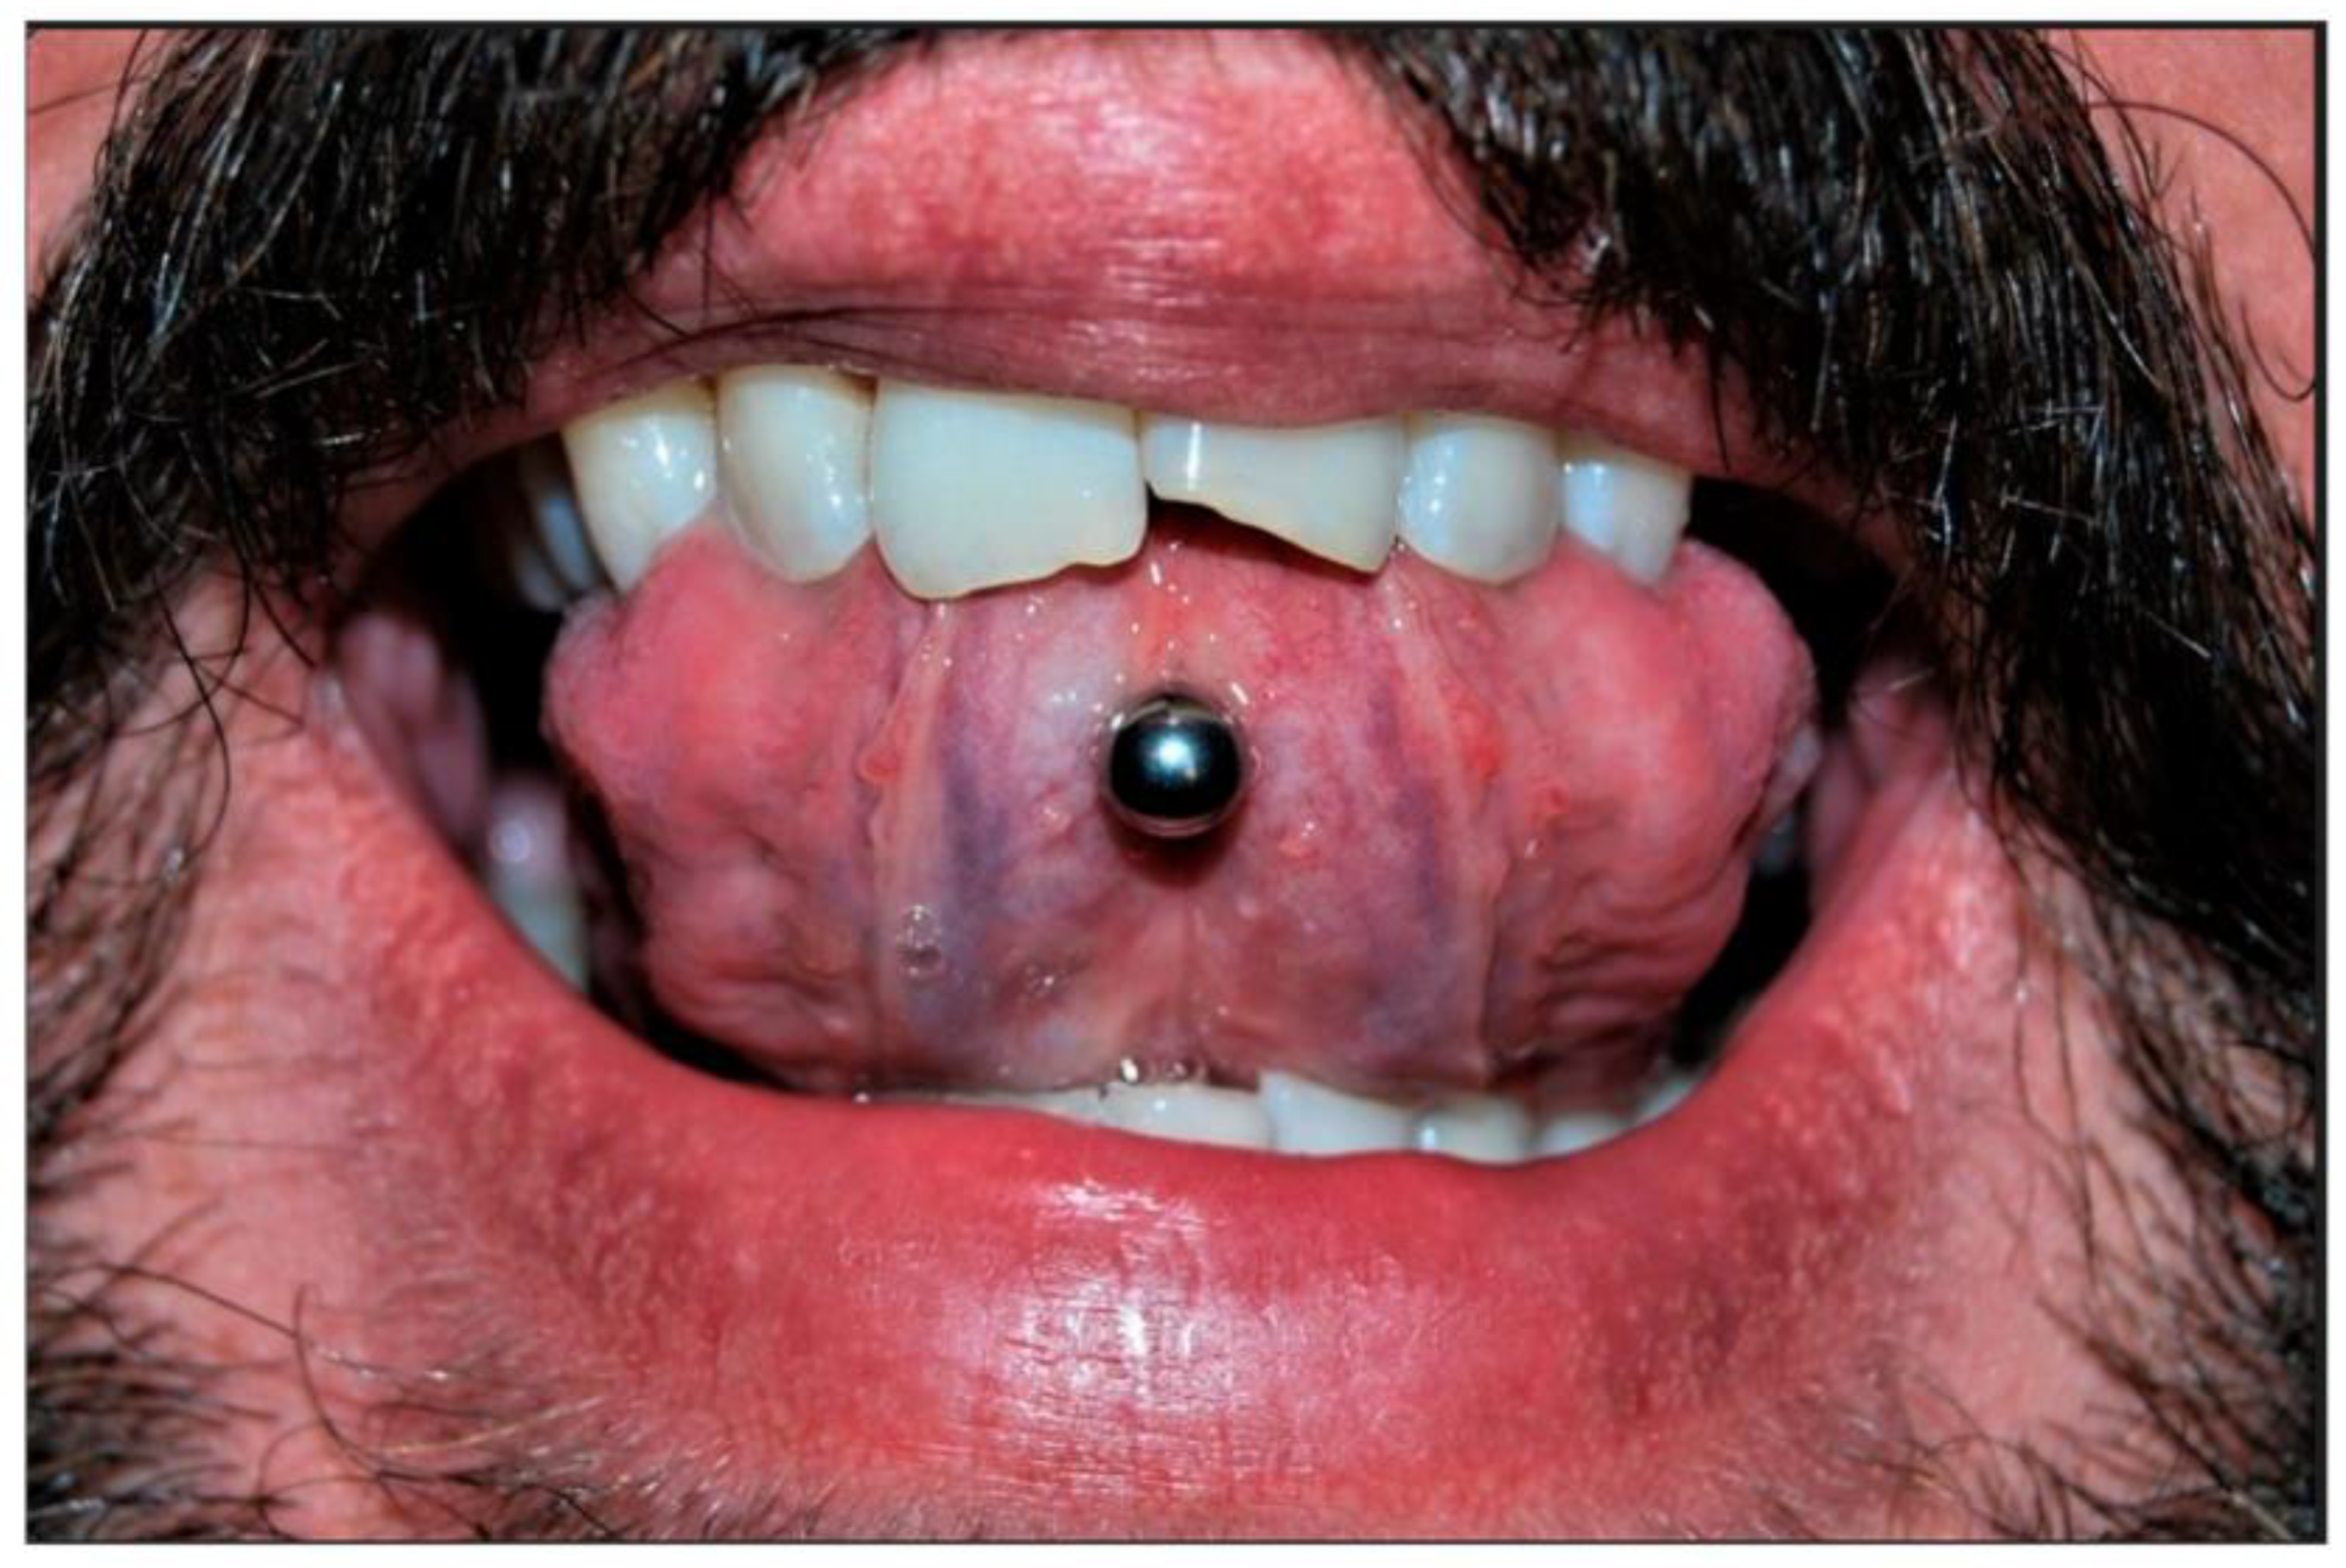 Periodontal inflammation a risk with tongue piercing